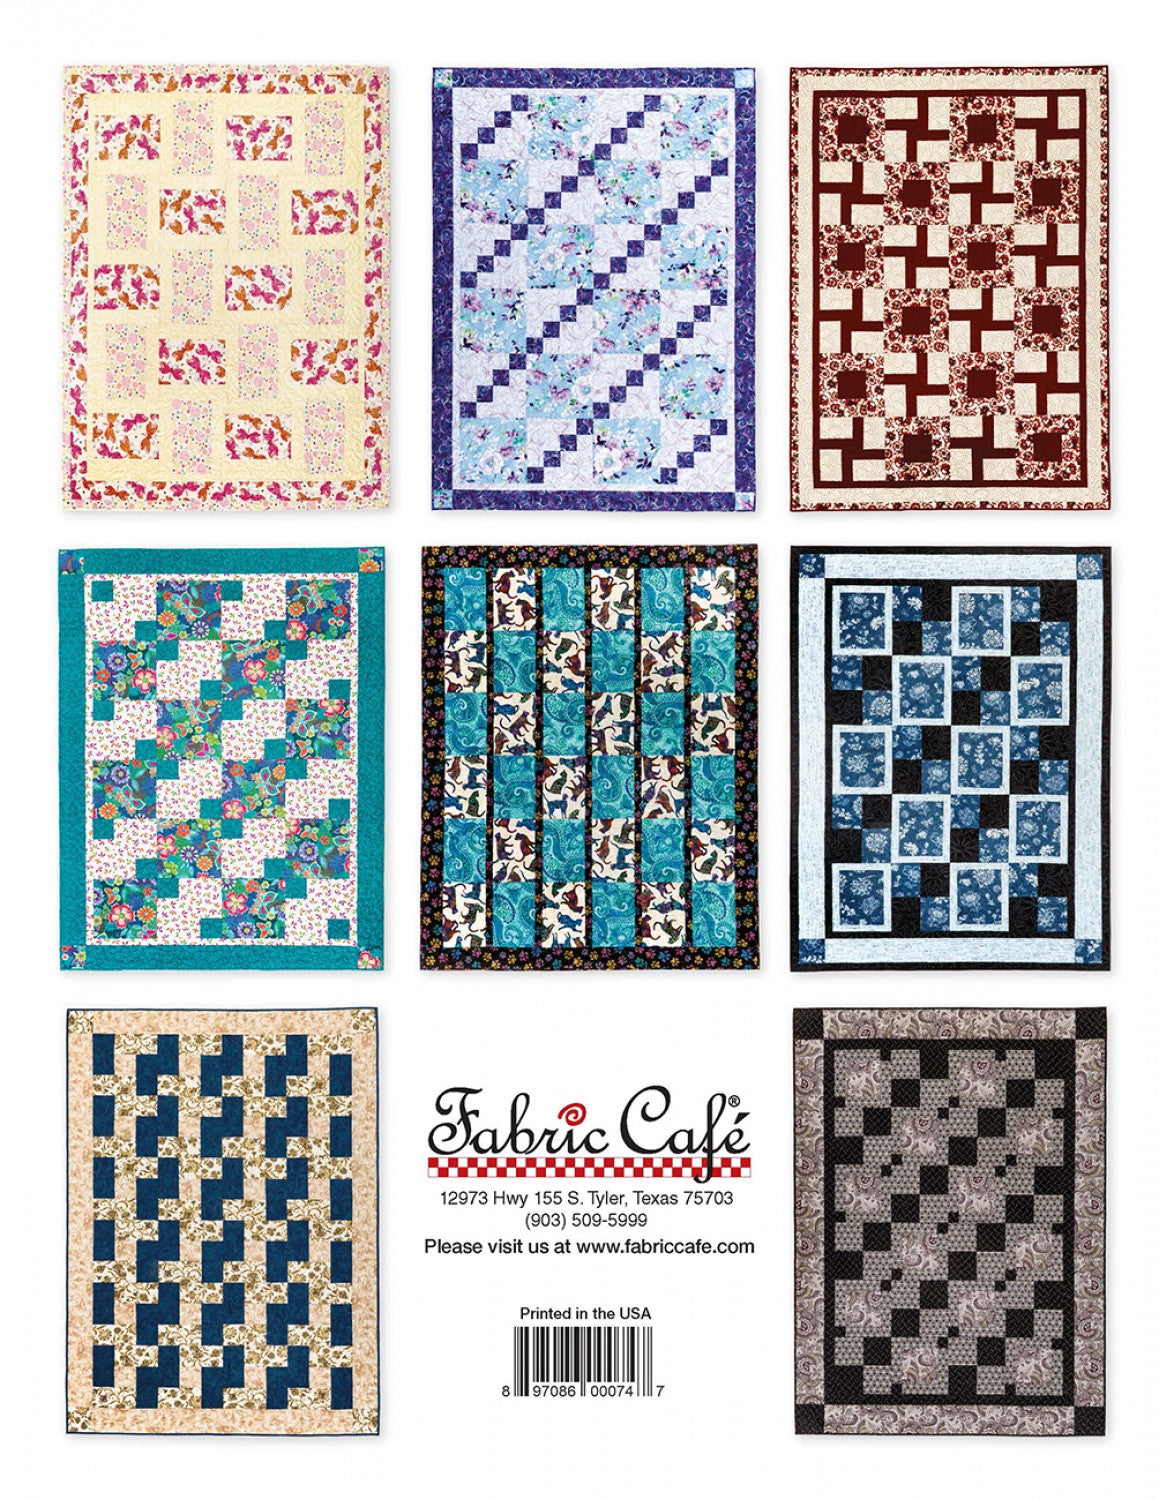 PATTERN BOOK, 3 Yard Quilts - QUILTS IN A JIFFY – The Singer